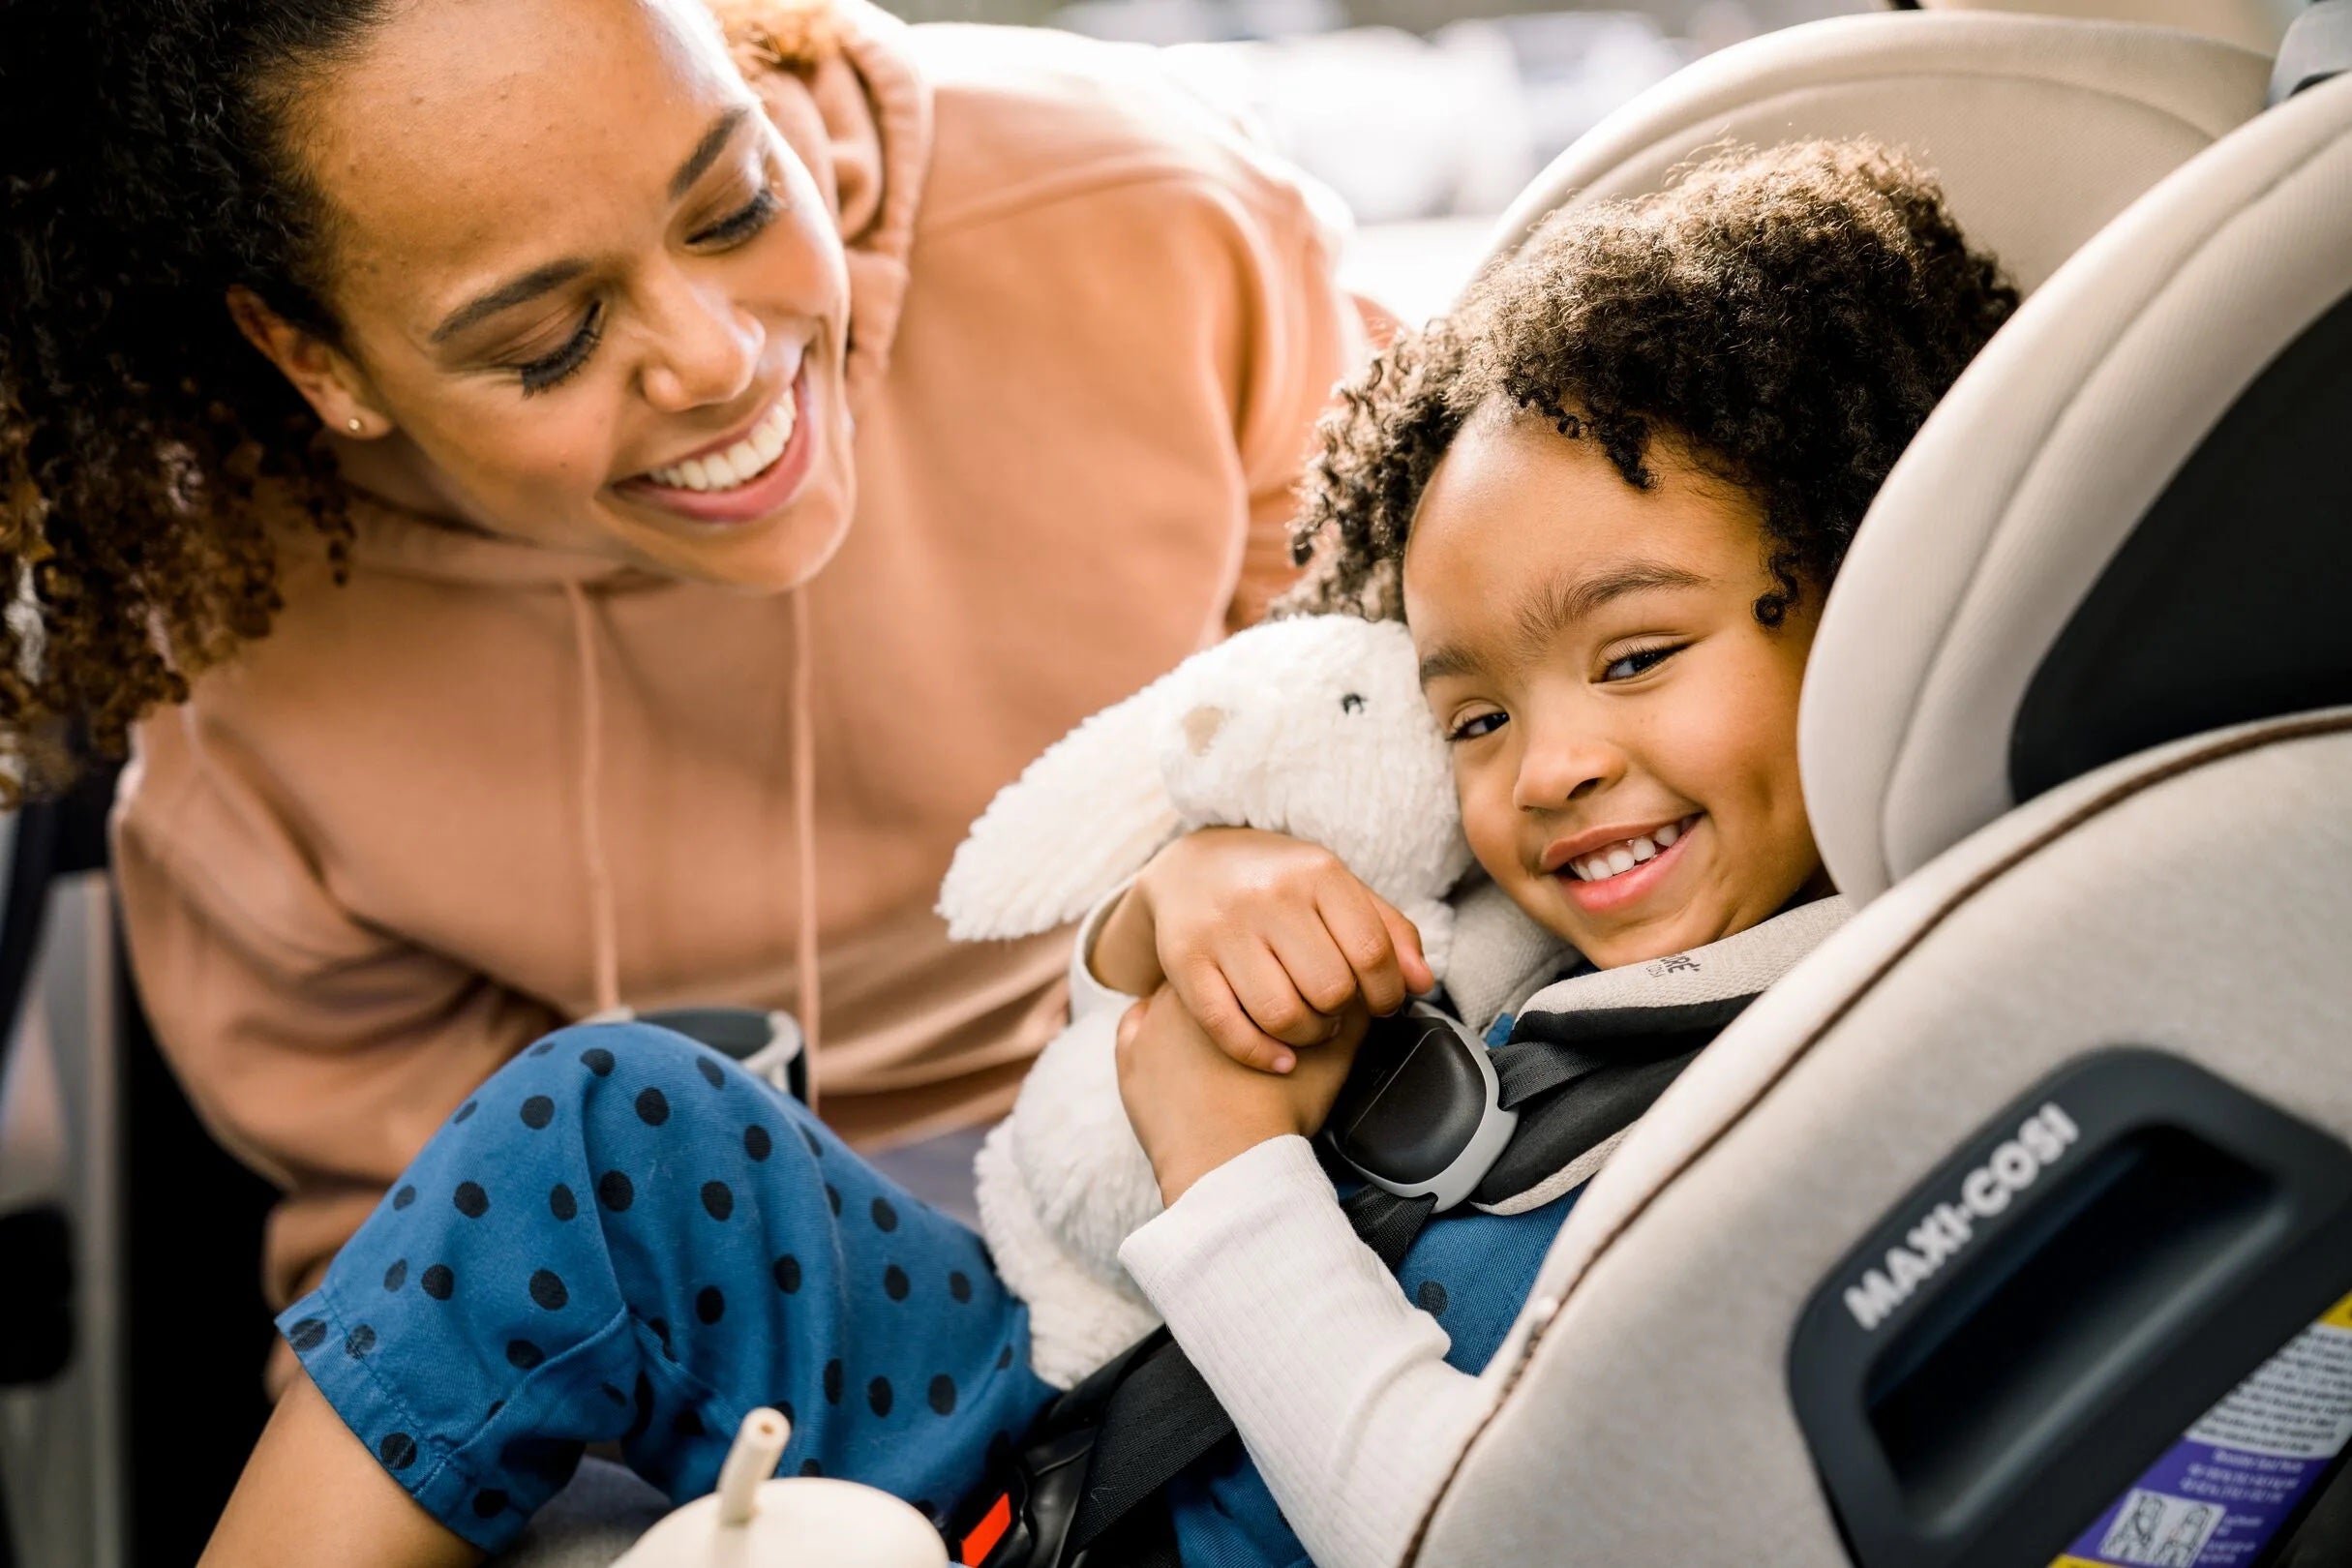 daughter holding bunny stuffed animal in infant car seat with mother smiling by her side